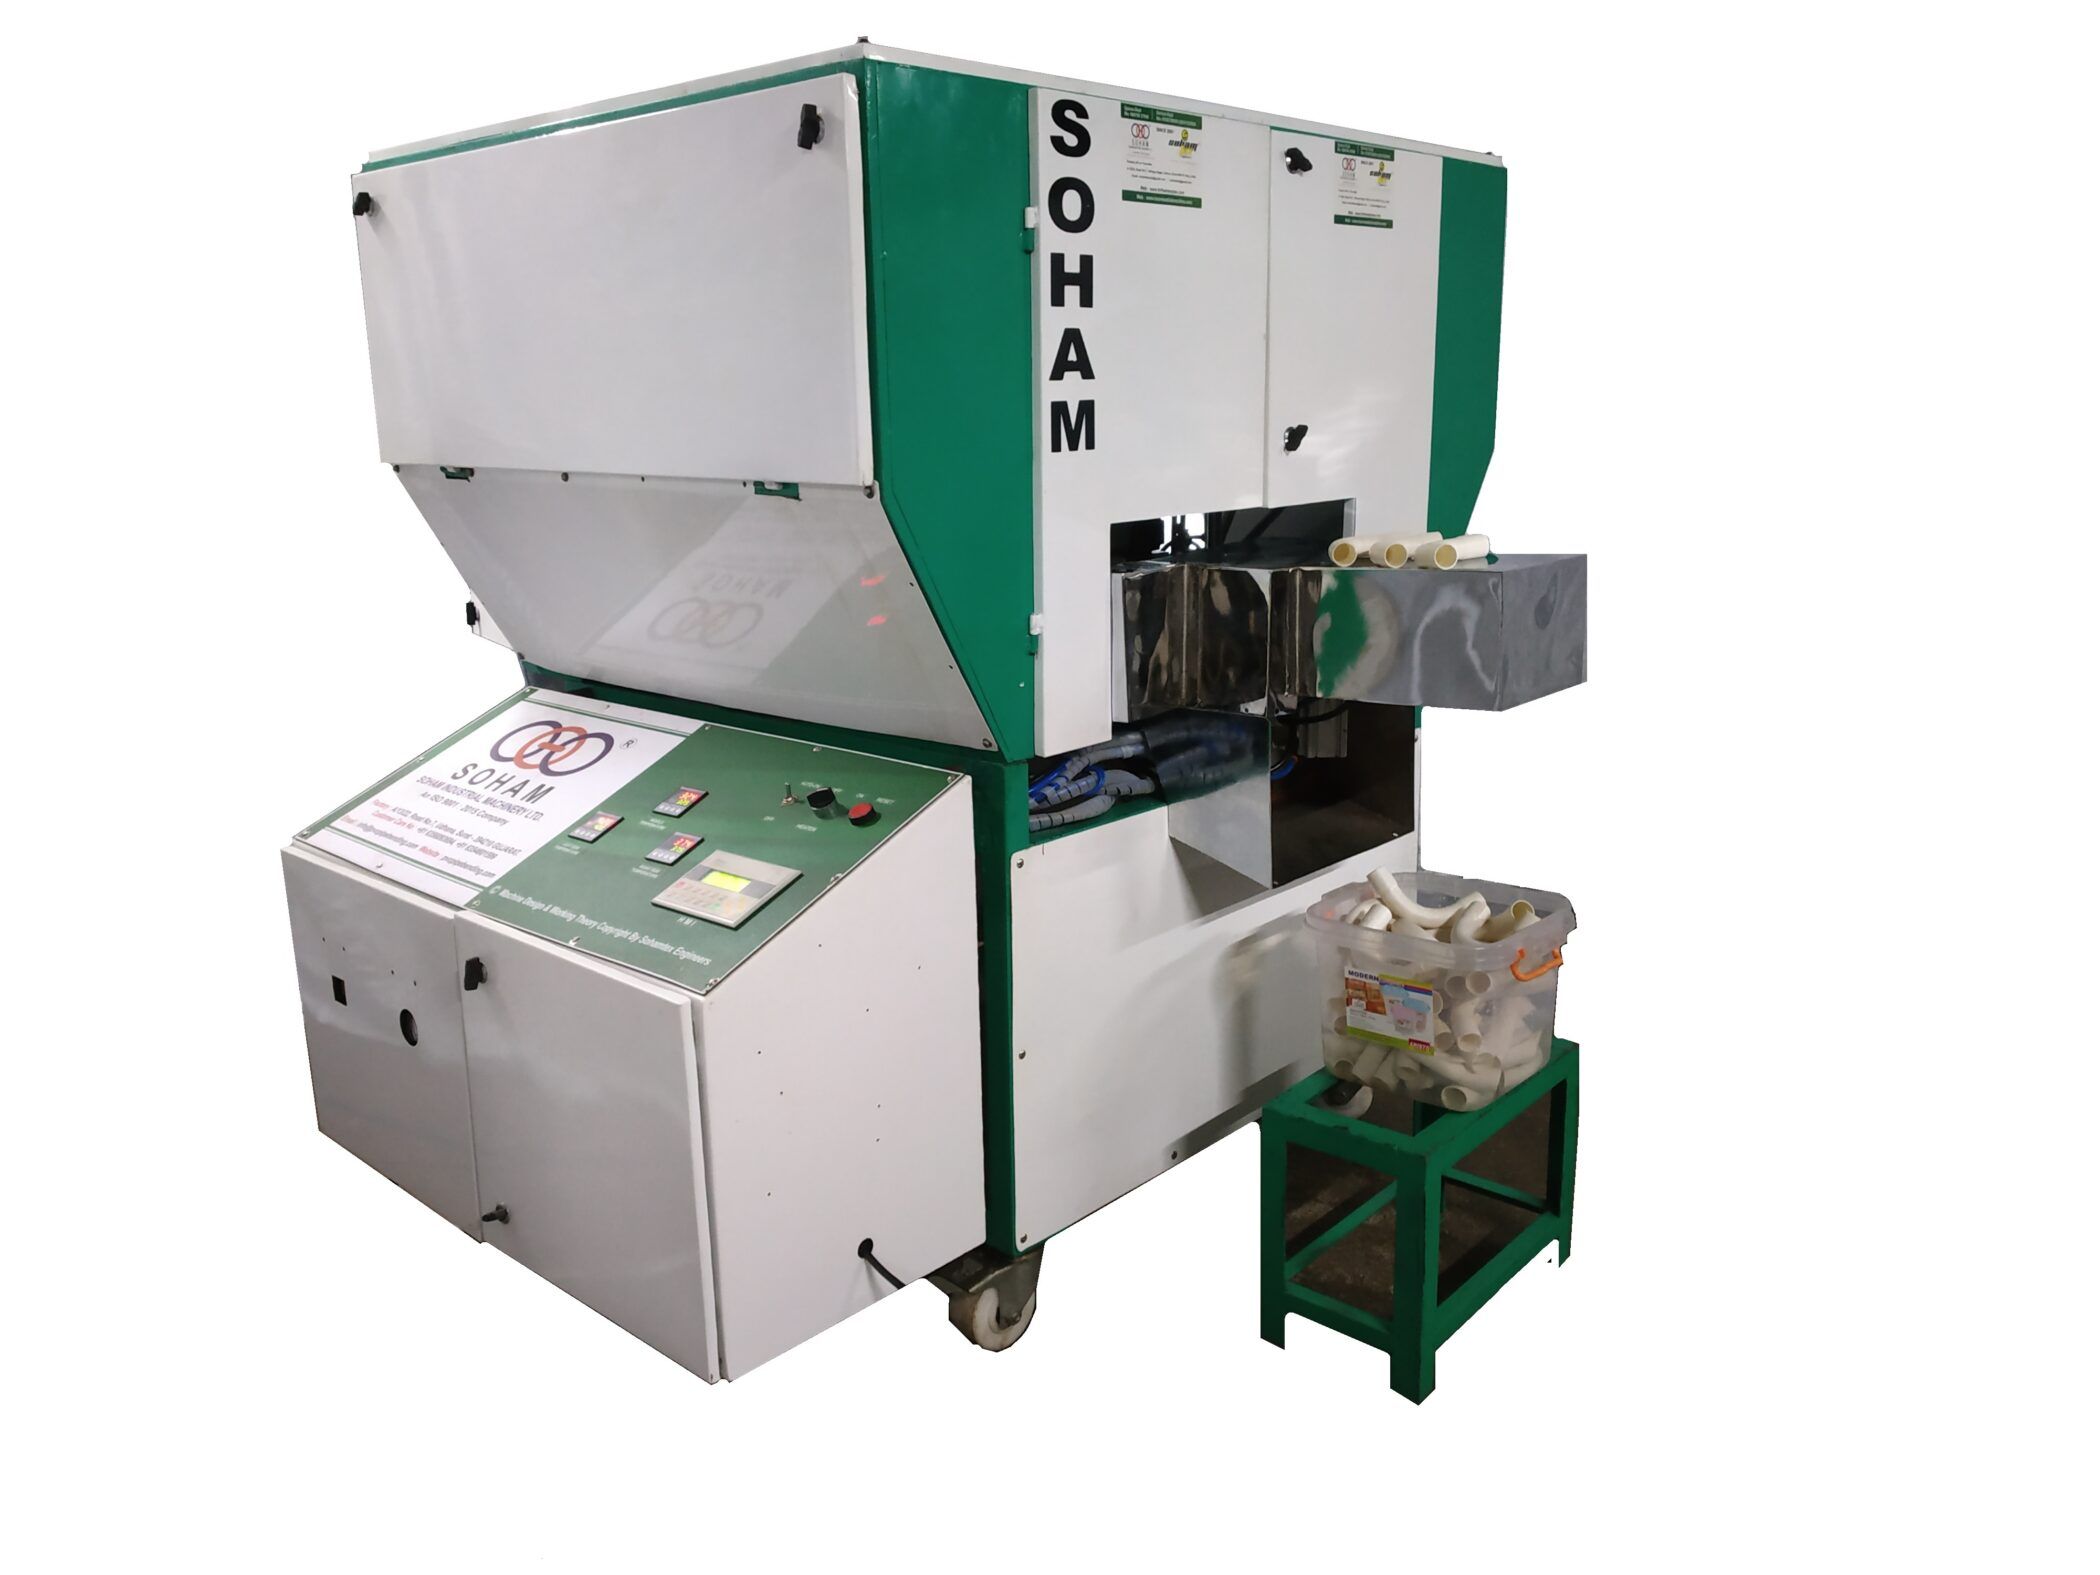 PRIMARY REQUIREMENT FOR Pvc pipe bending machine